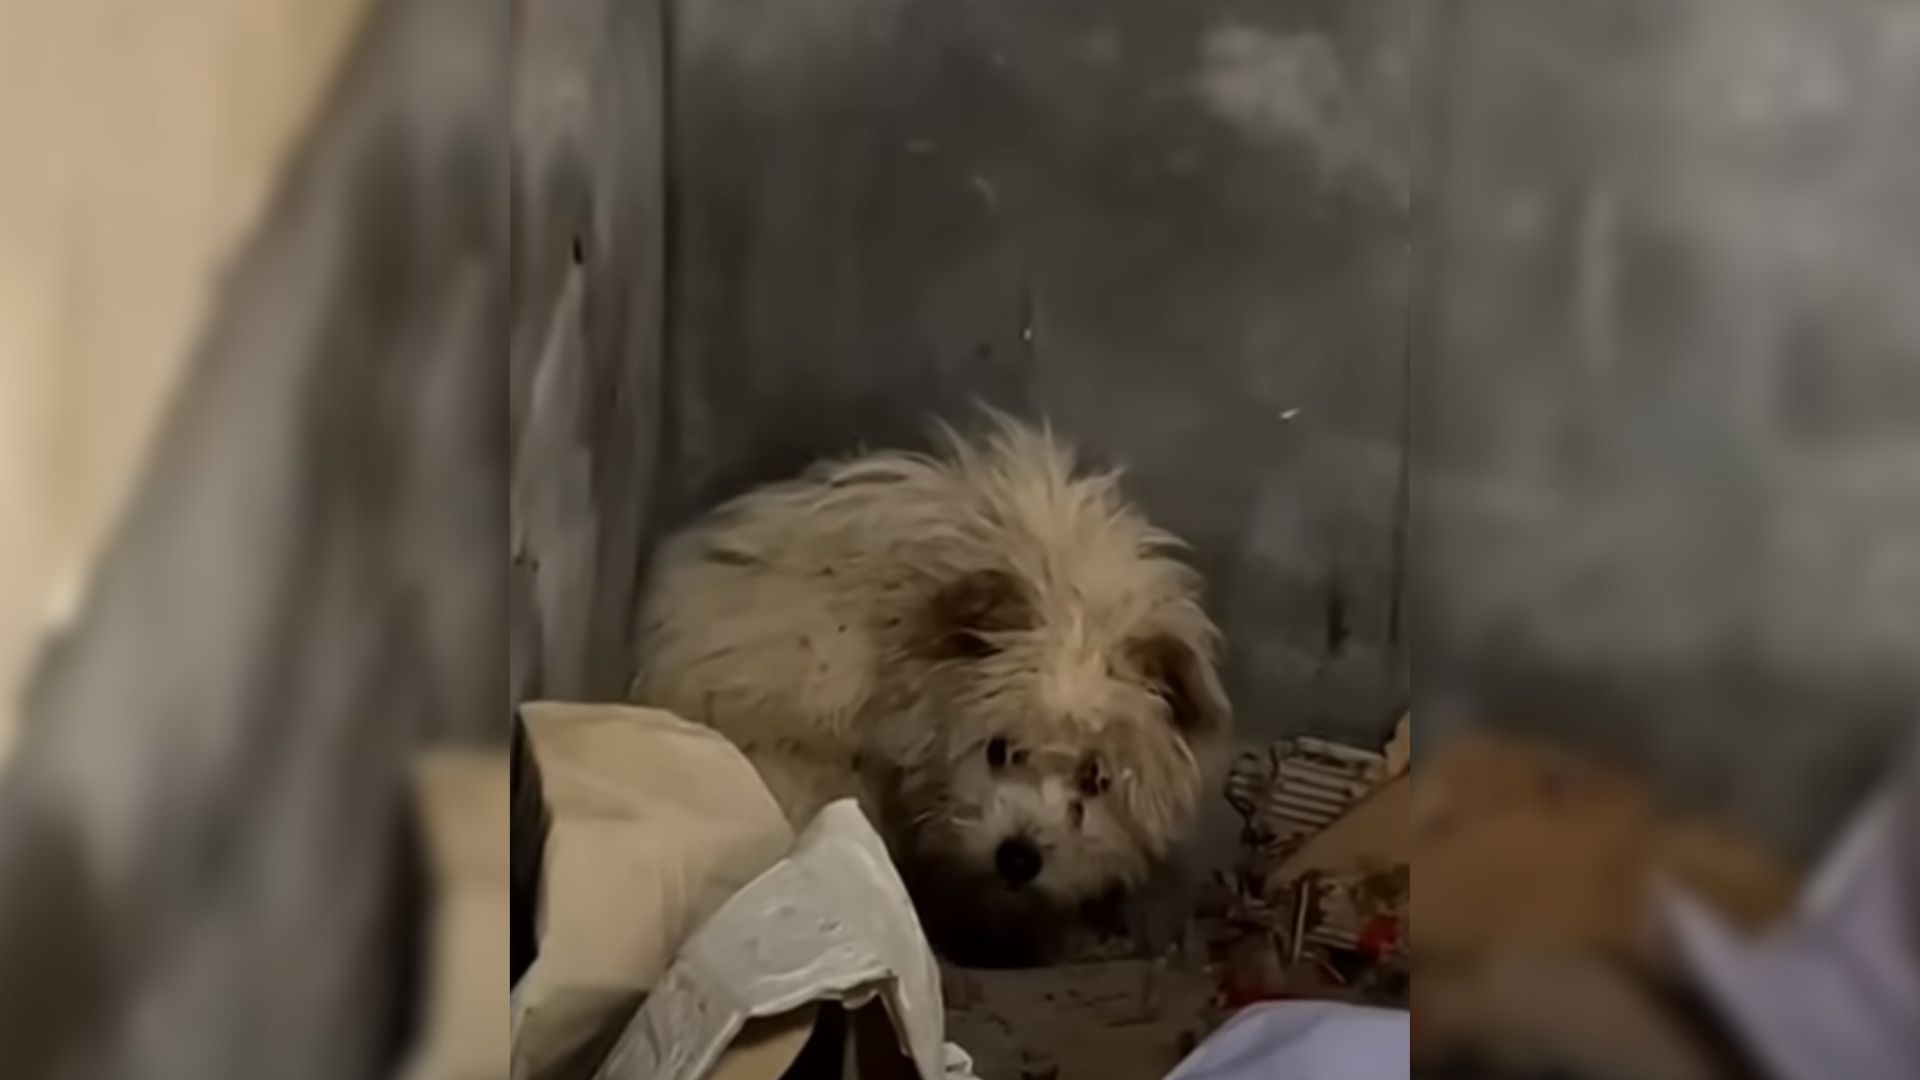 Starving Dog Found Lying Helplessly In An Abandoned House, Hoping To Find Help